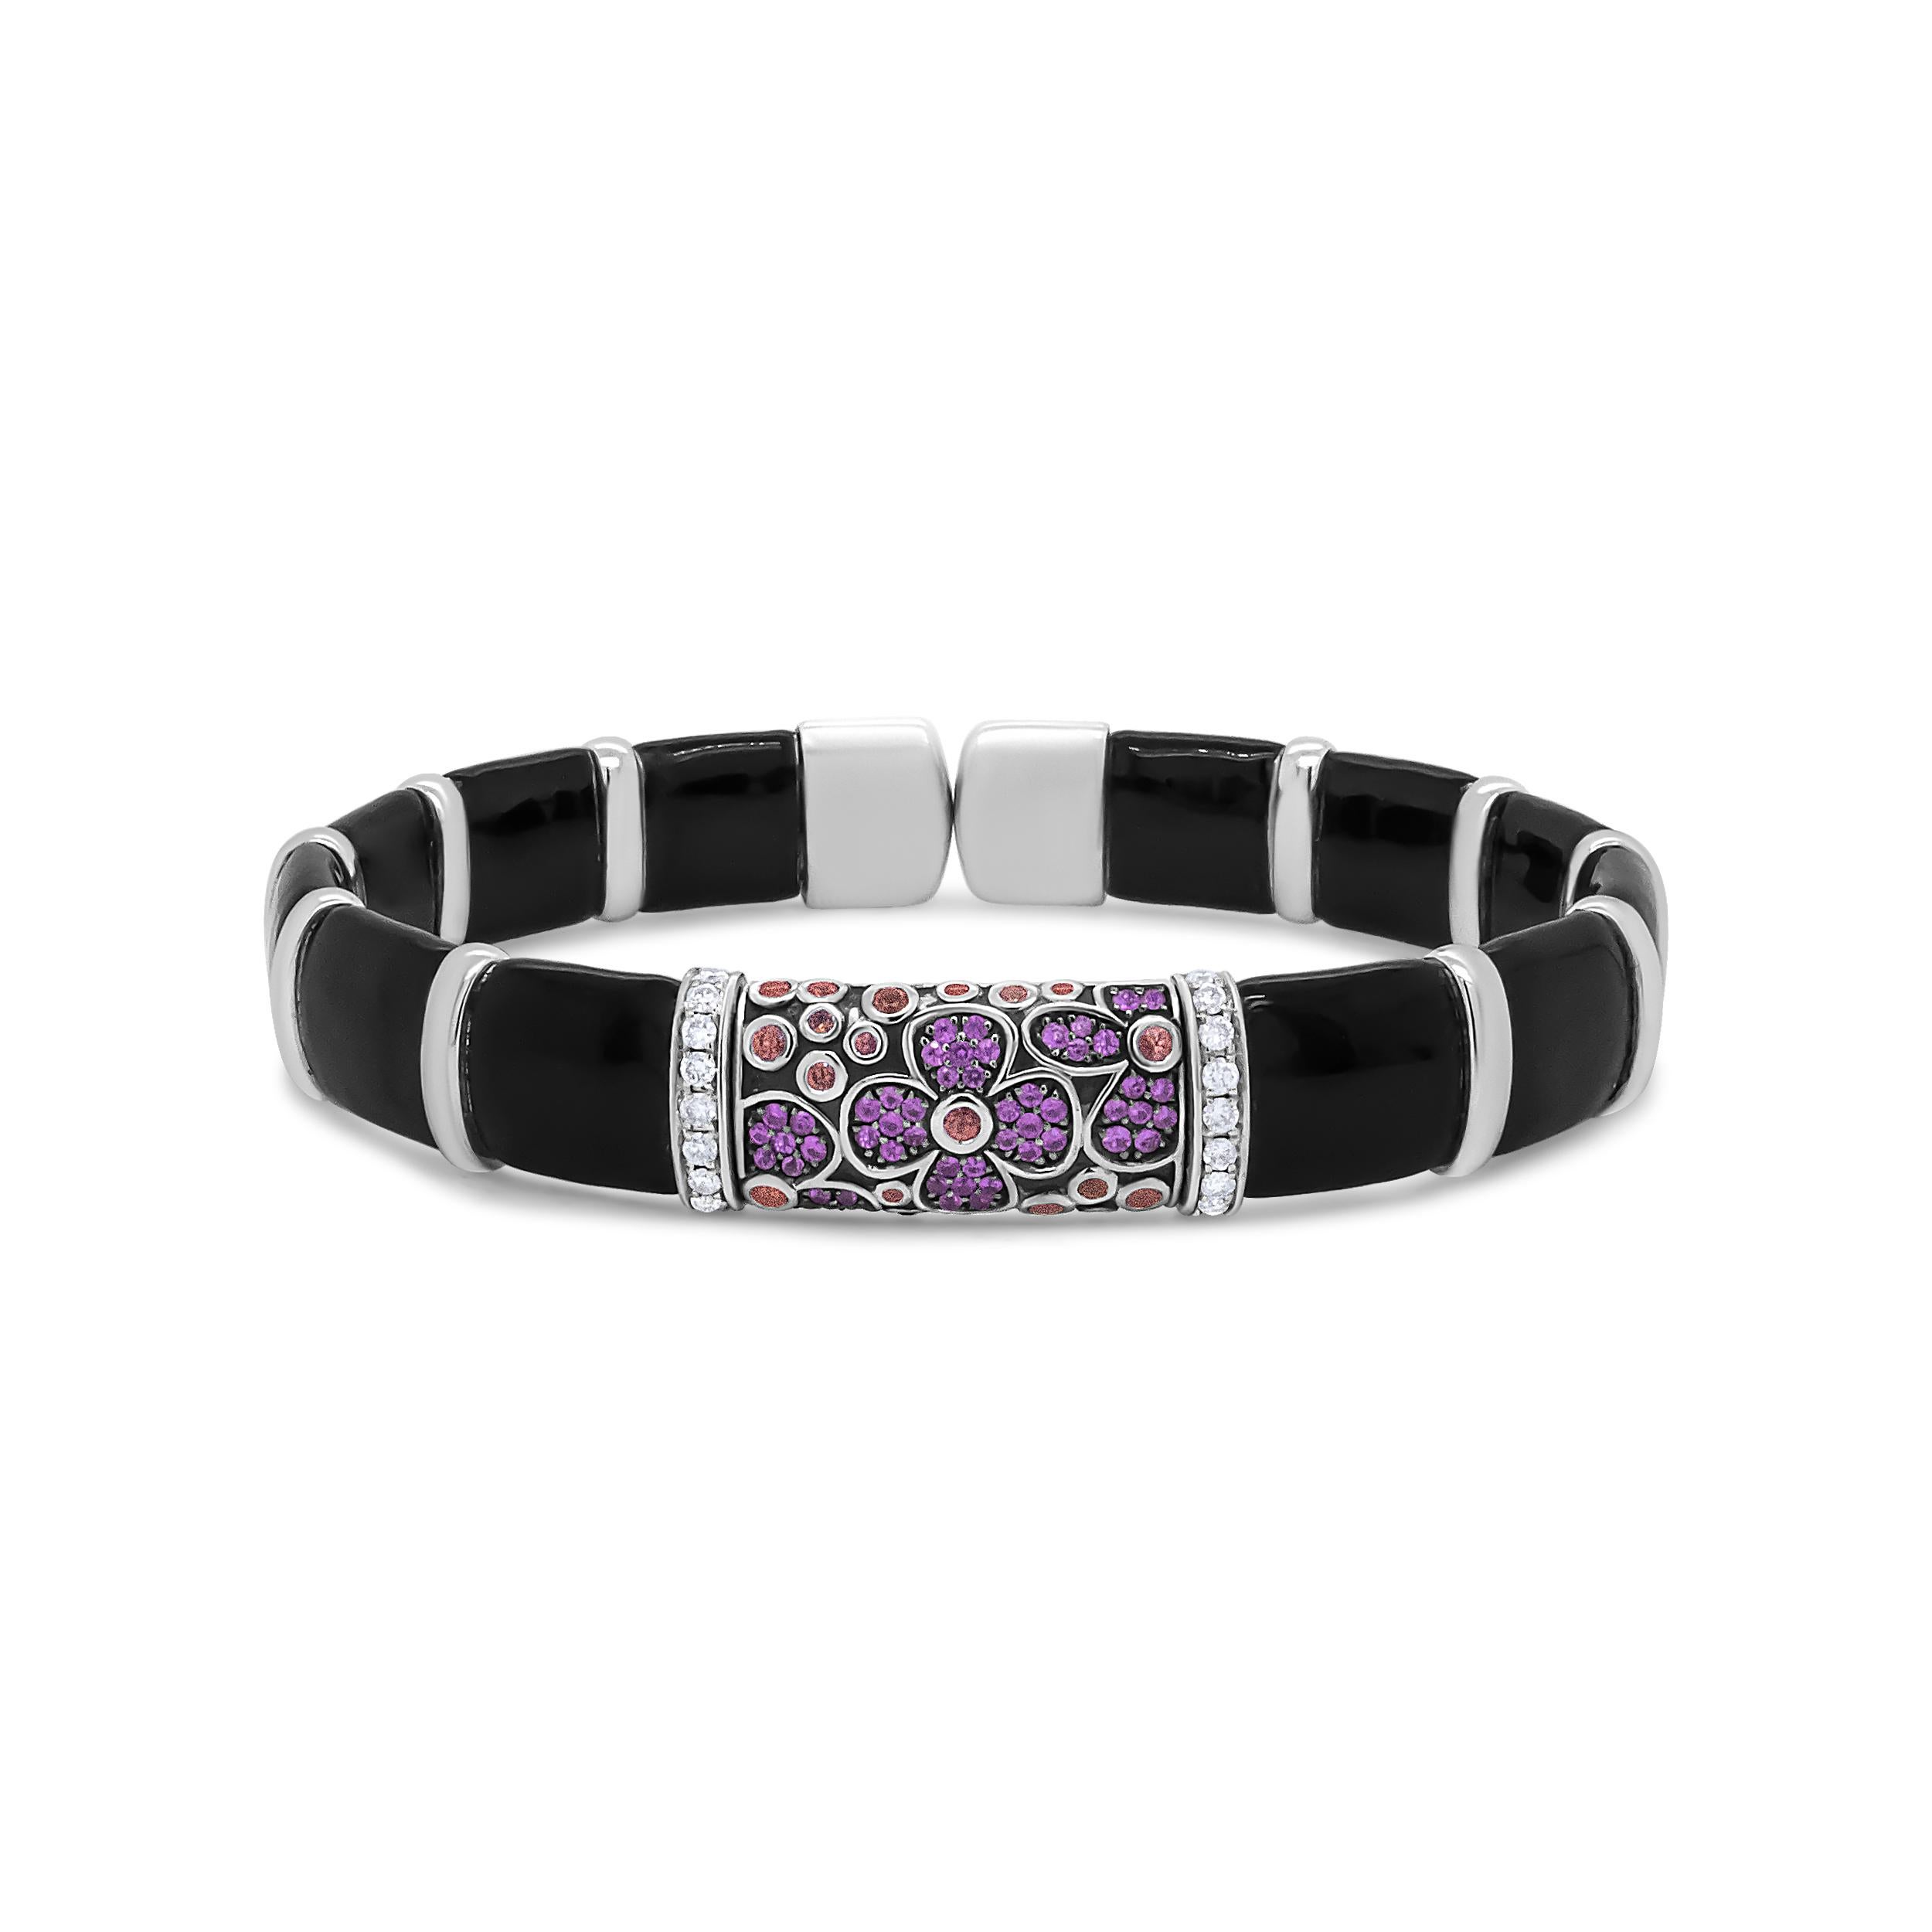 .925 Sterling Silver Black and Brown Enamel 1/3 Cttw Round Diamonds and Pink and Orange Sapphire Gemstones Floral Statement Bangle Bracelet (F-G Color, VS1-VS2 Clarity) - Size 7.75